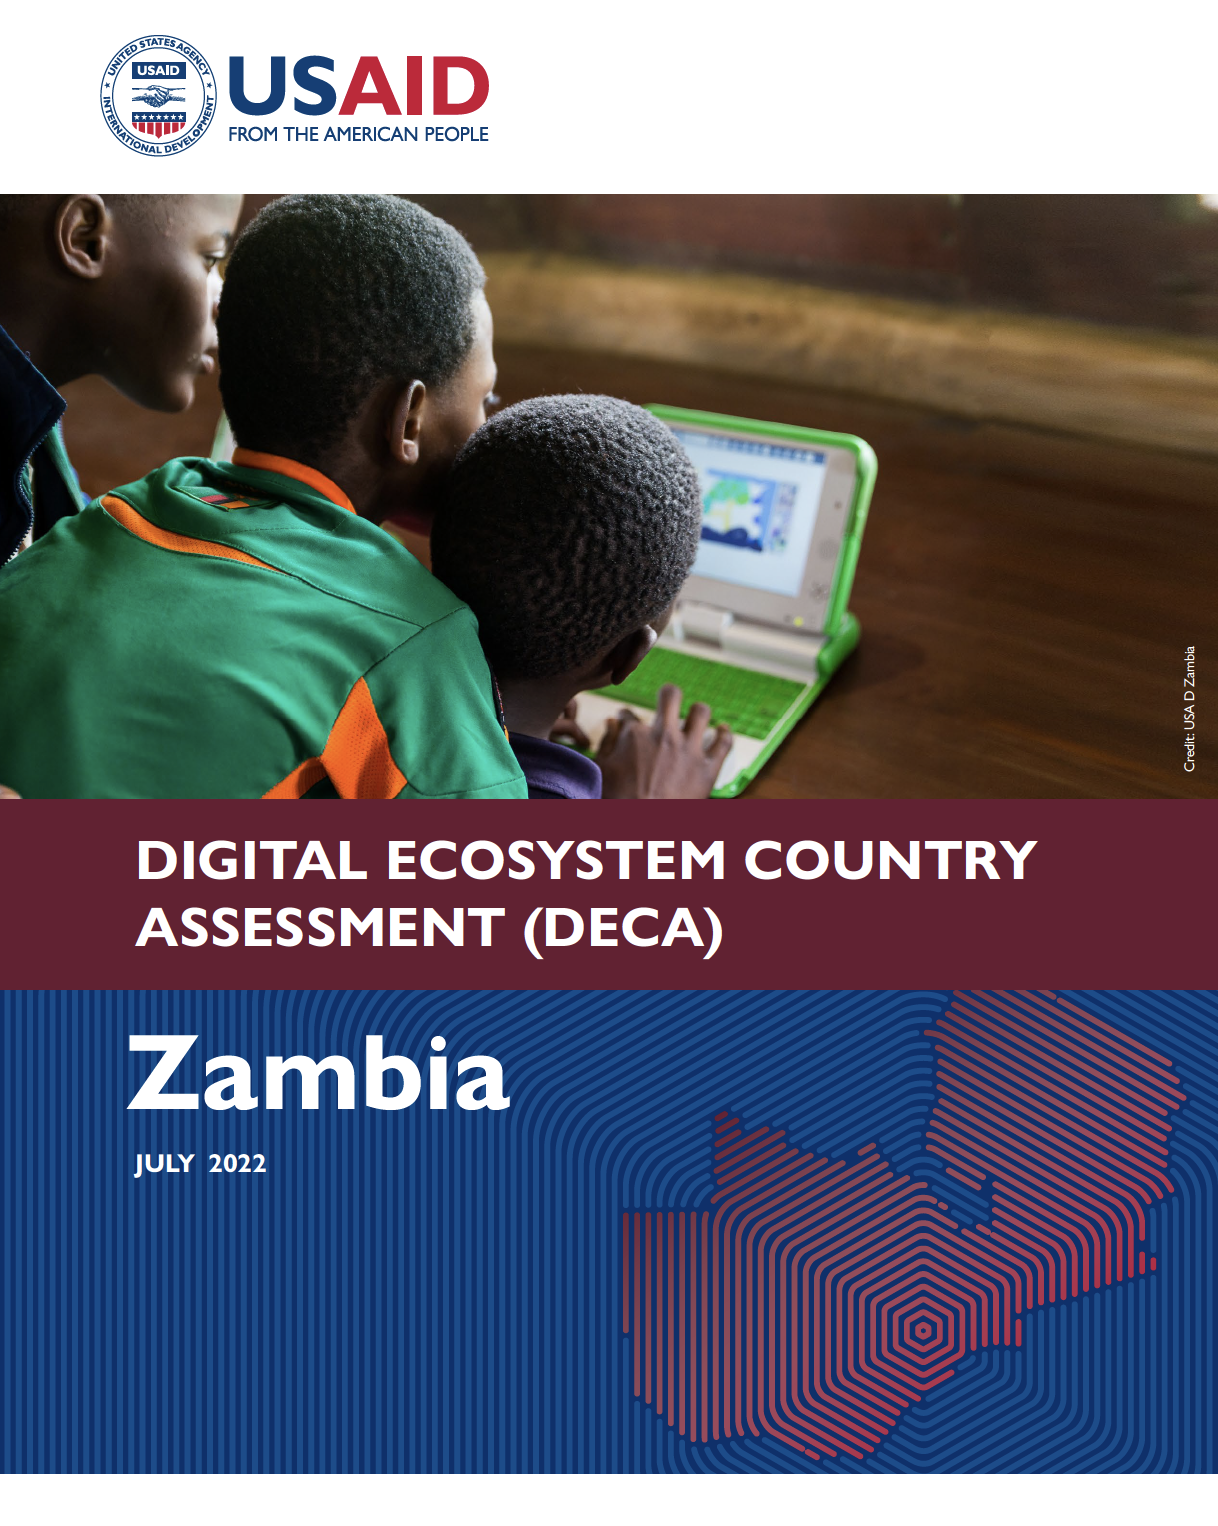 Three boys on a laptop on the cover of Zambia's Digital Ecosystem Country Assessment (DECA).